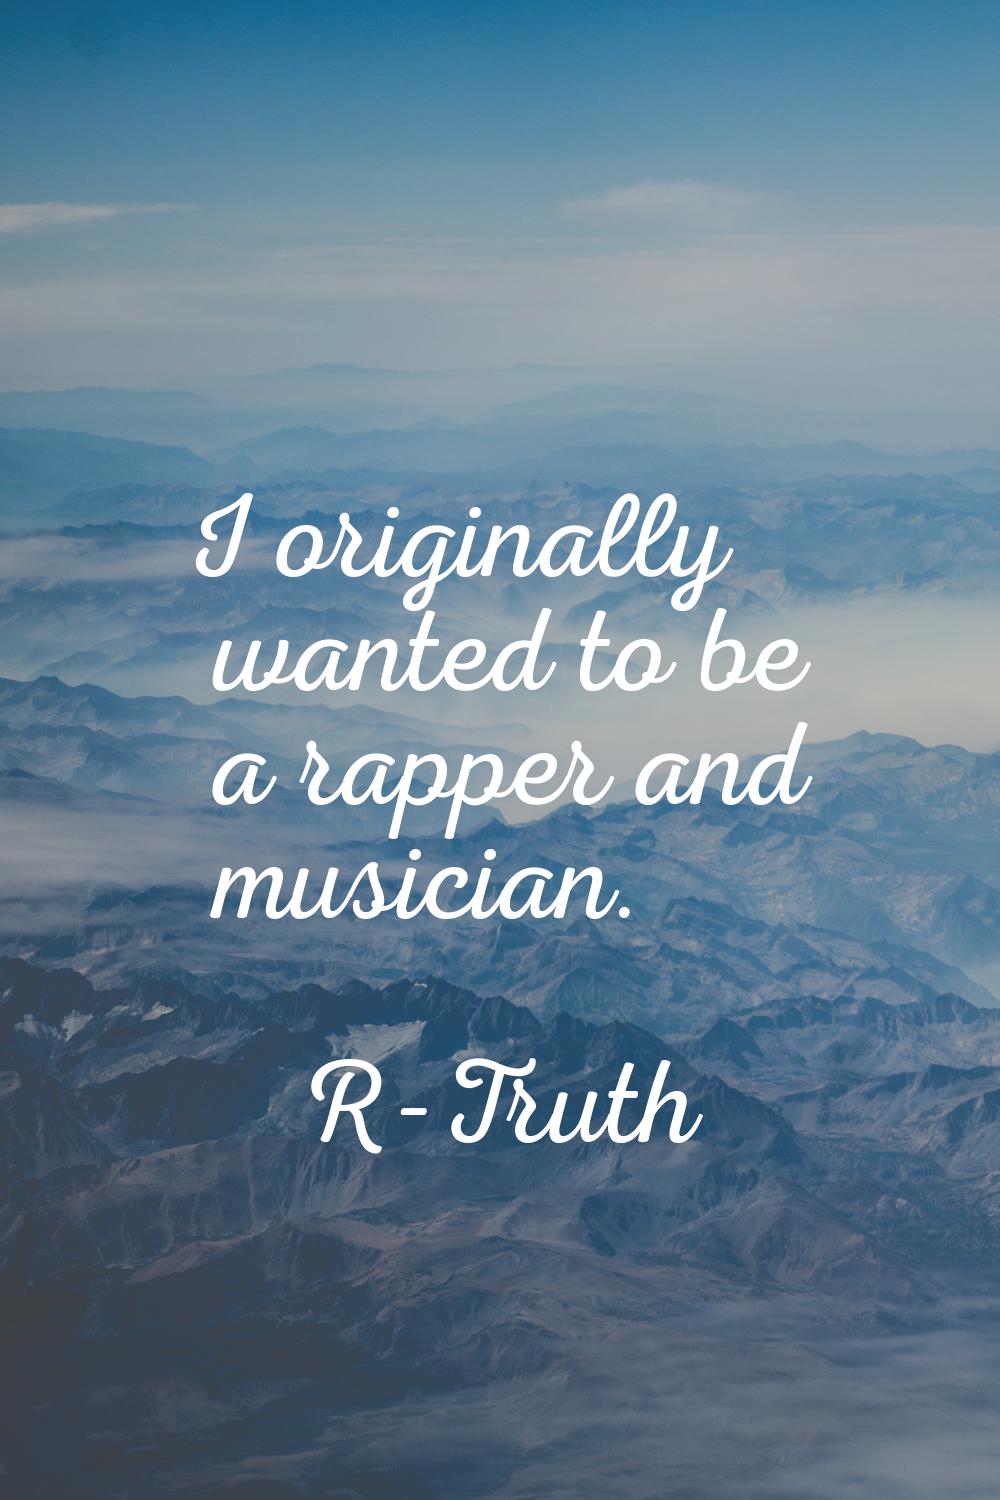 I originally wanted to be a rapper and musician.